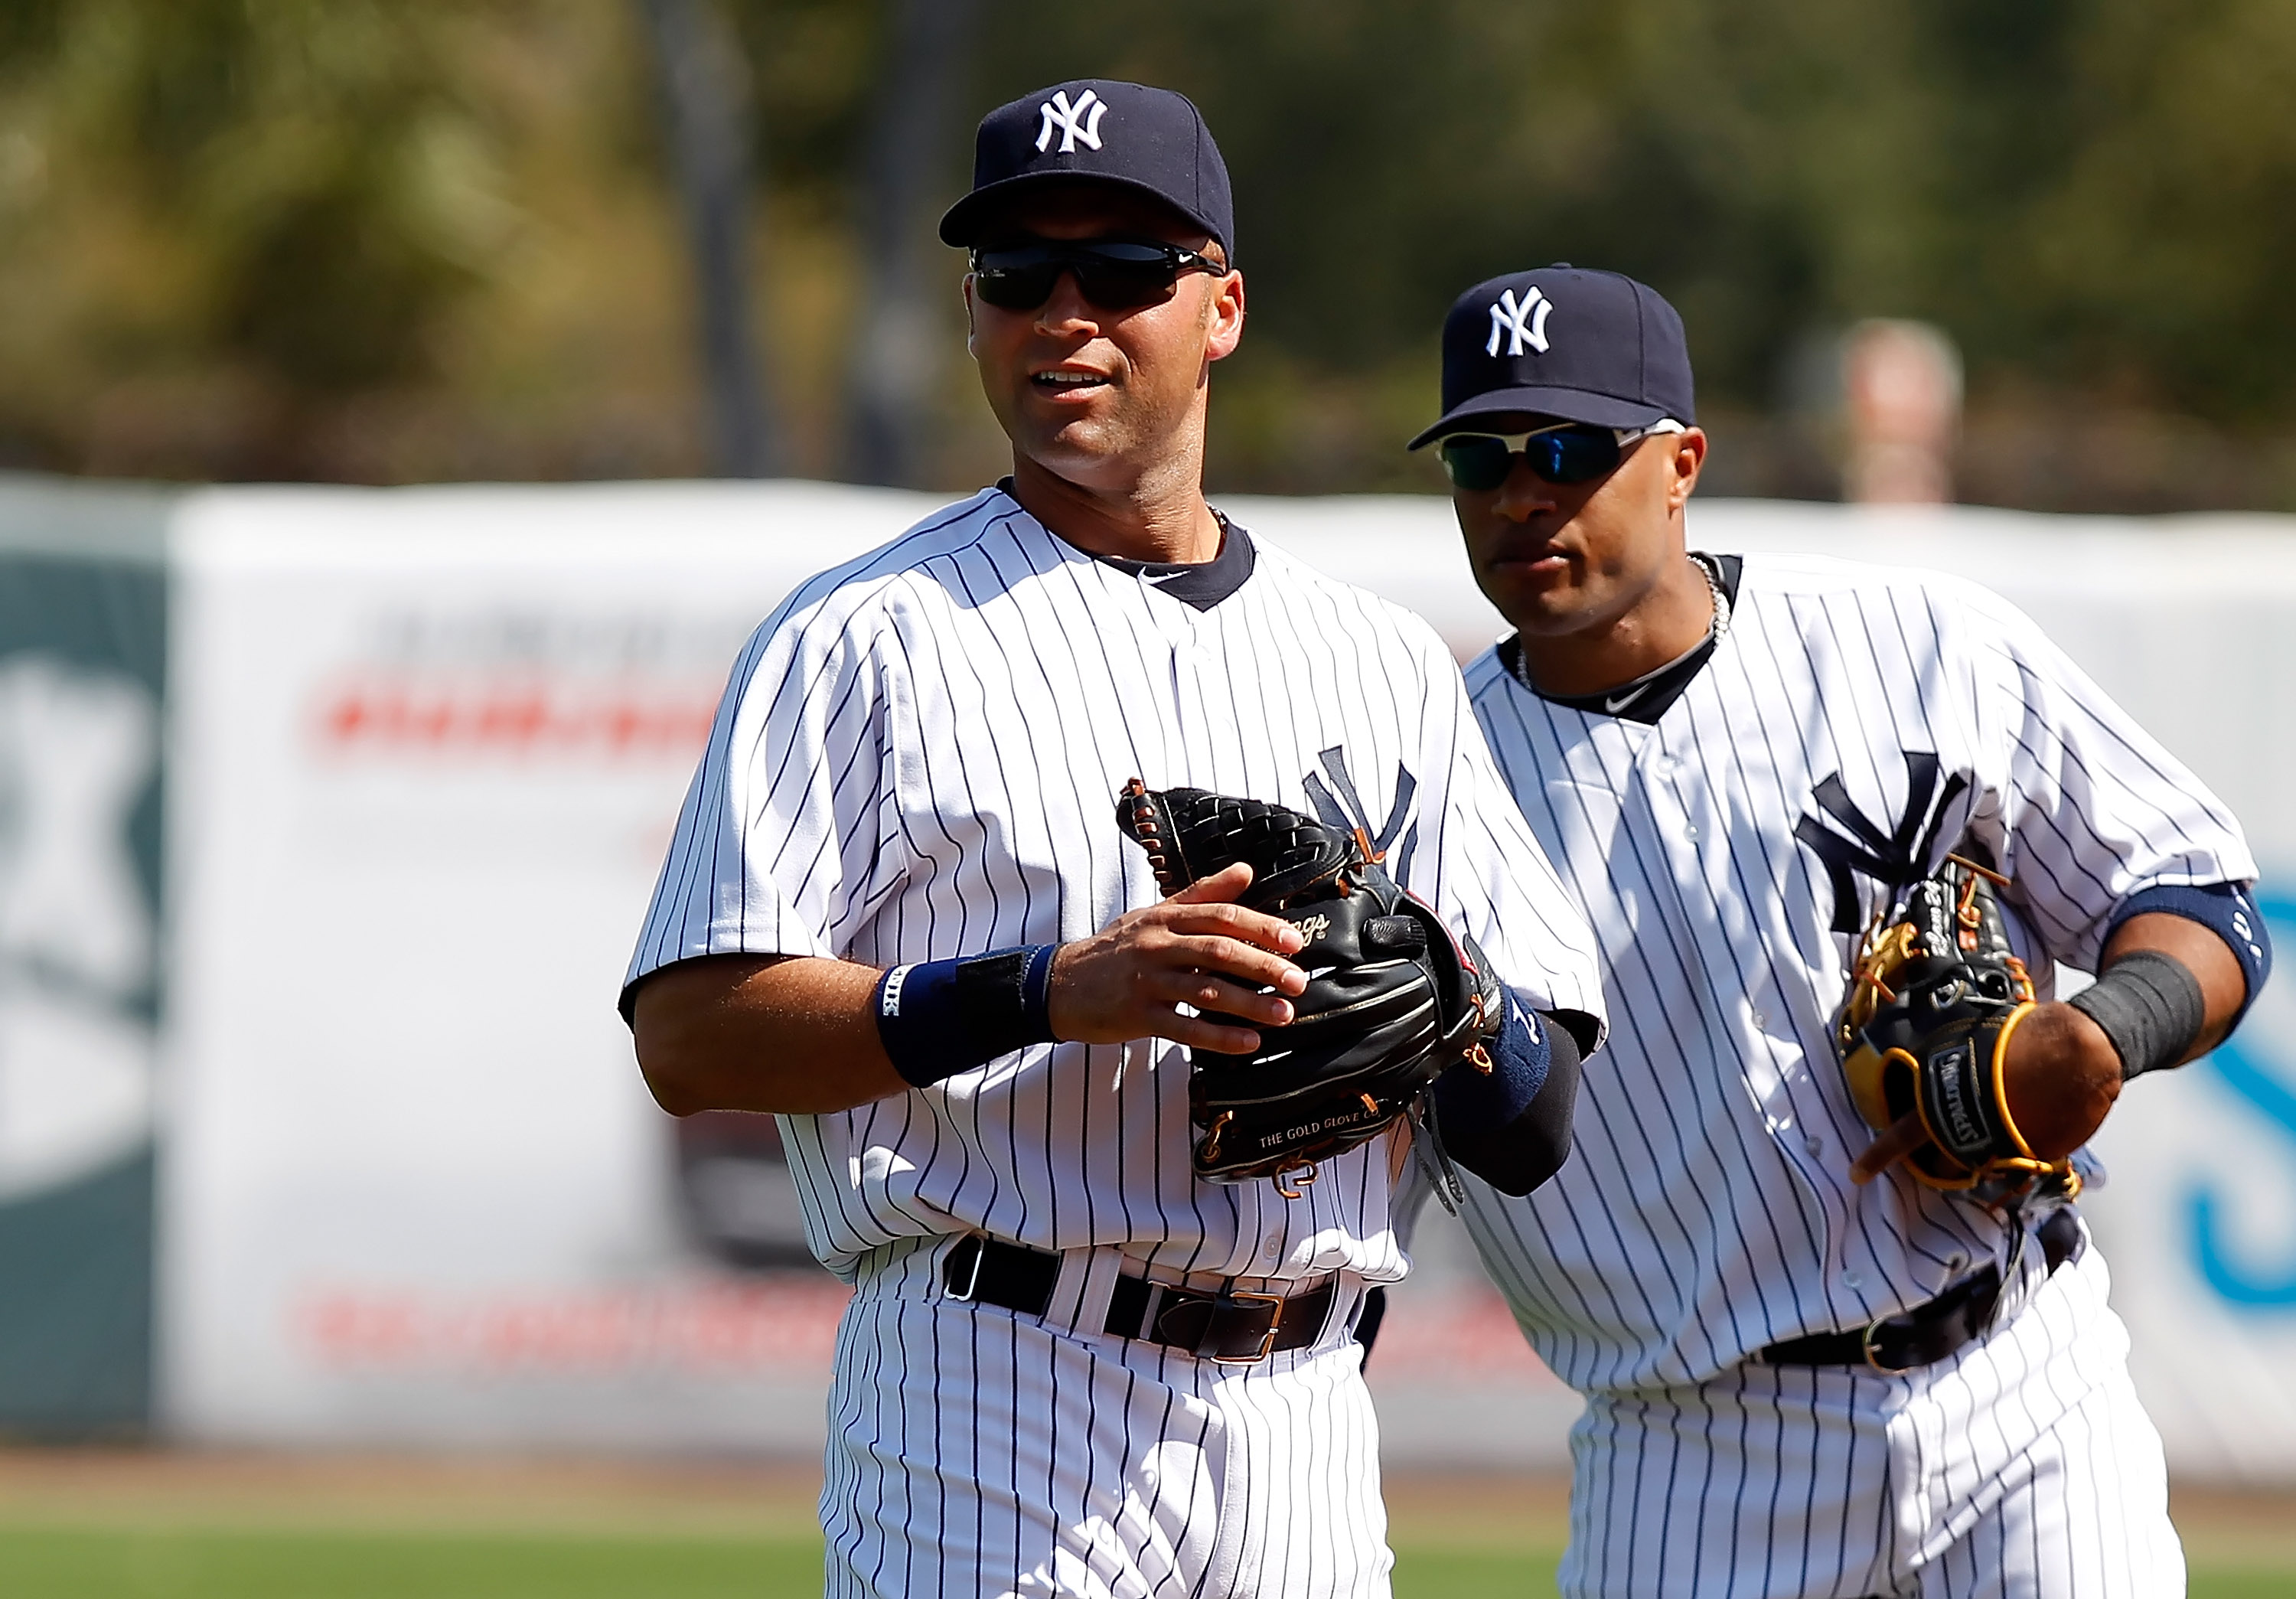 New York Yankees Derek Jeter and Melky Cabrera join hands after the game  against the Chicago White Sox at Yankee Stadium in New York City on  September 17, 2008. The Yankees defeated